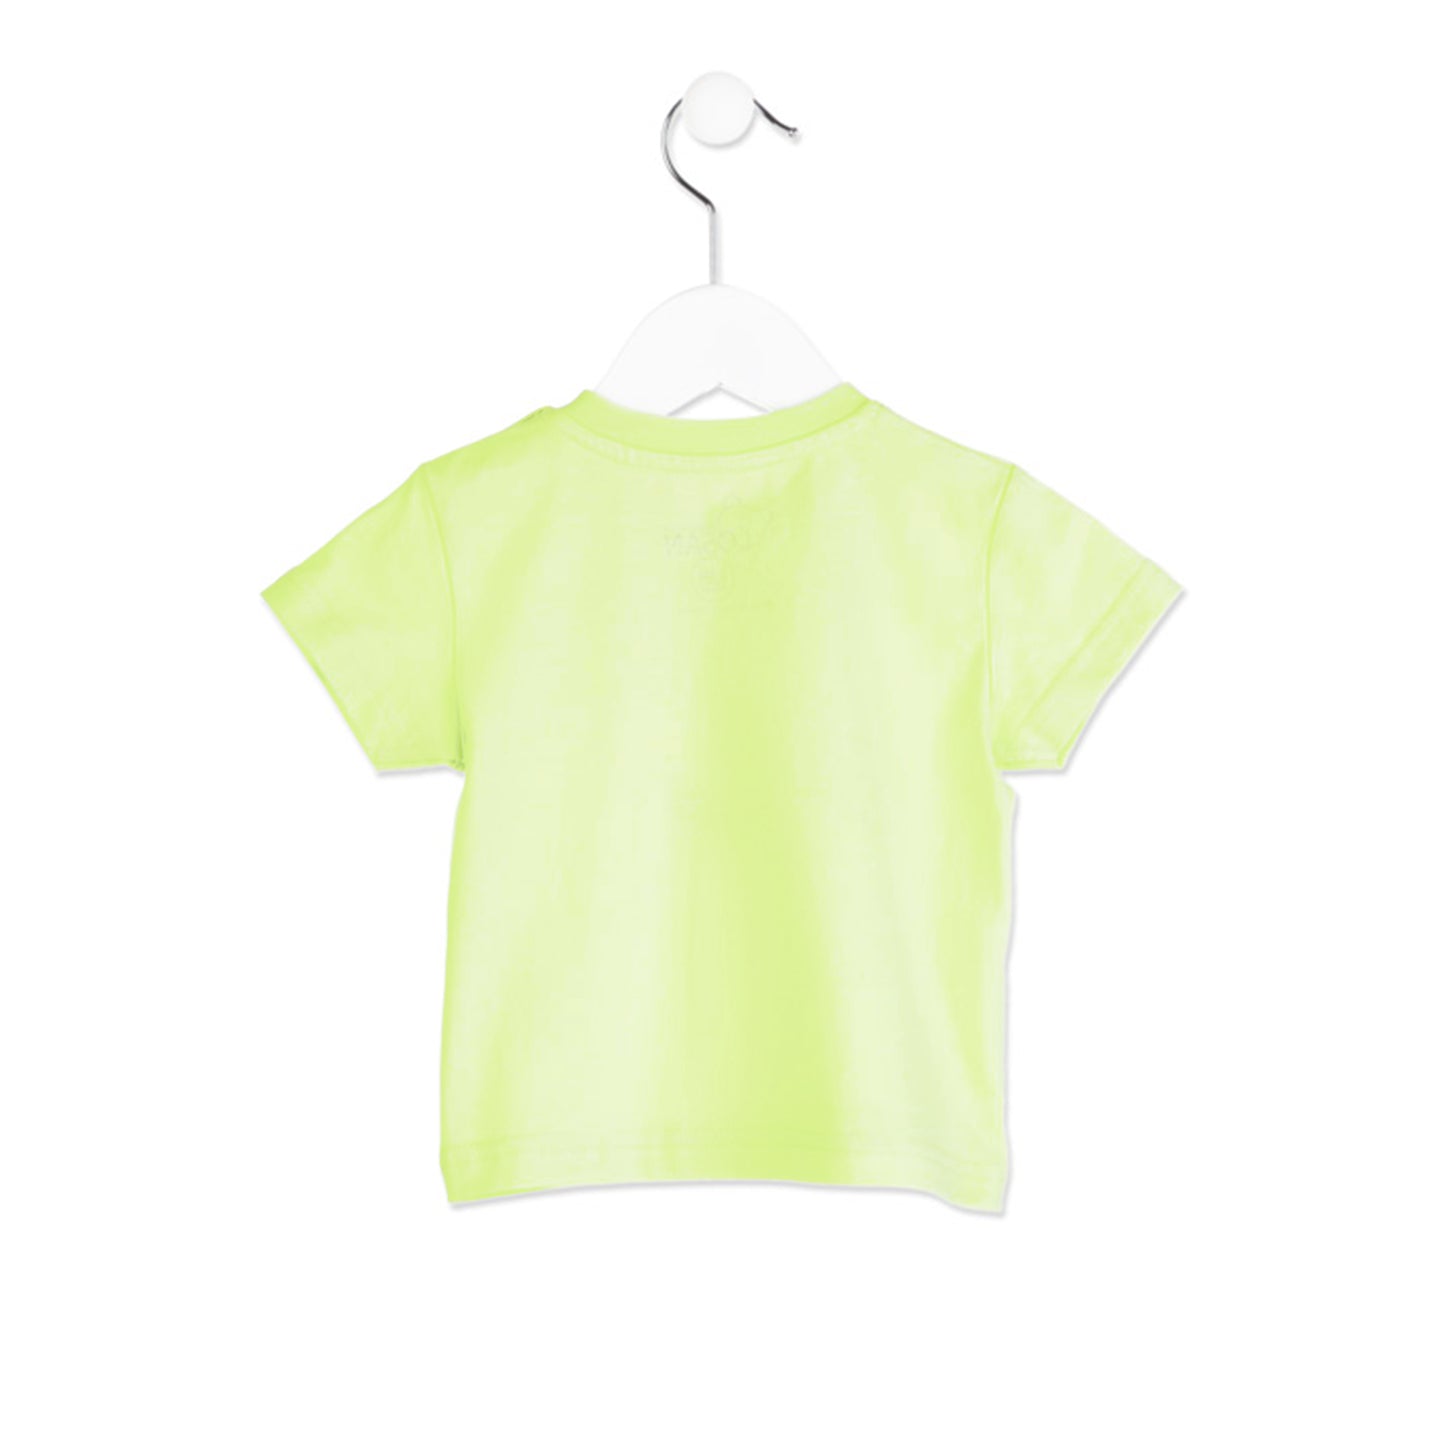 Losan - Baby Boy Green T-Shirt with Animal Face